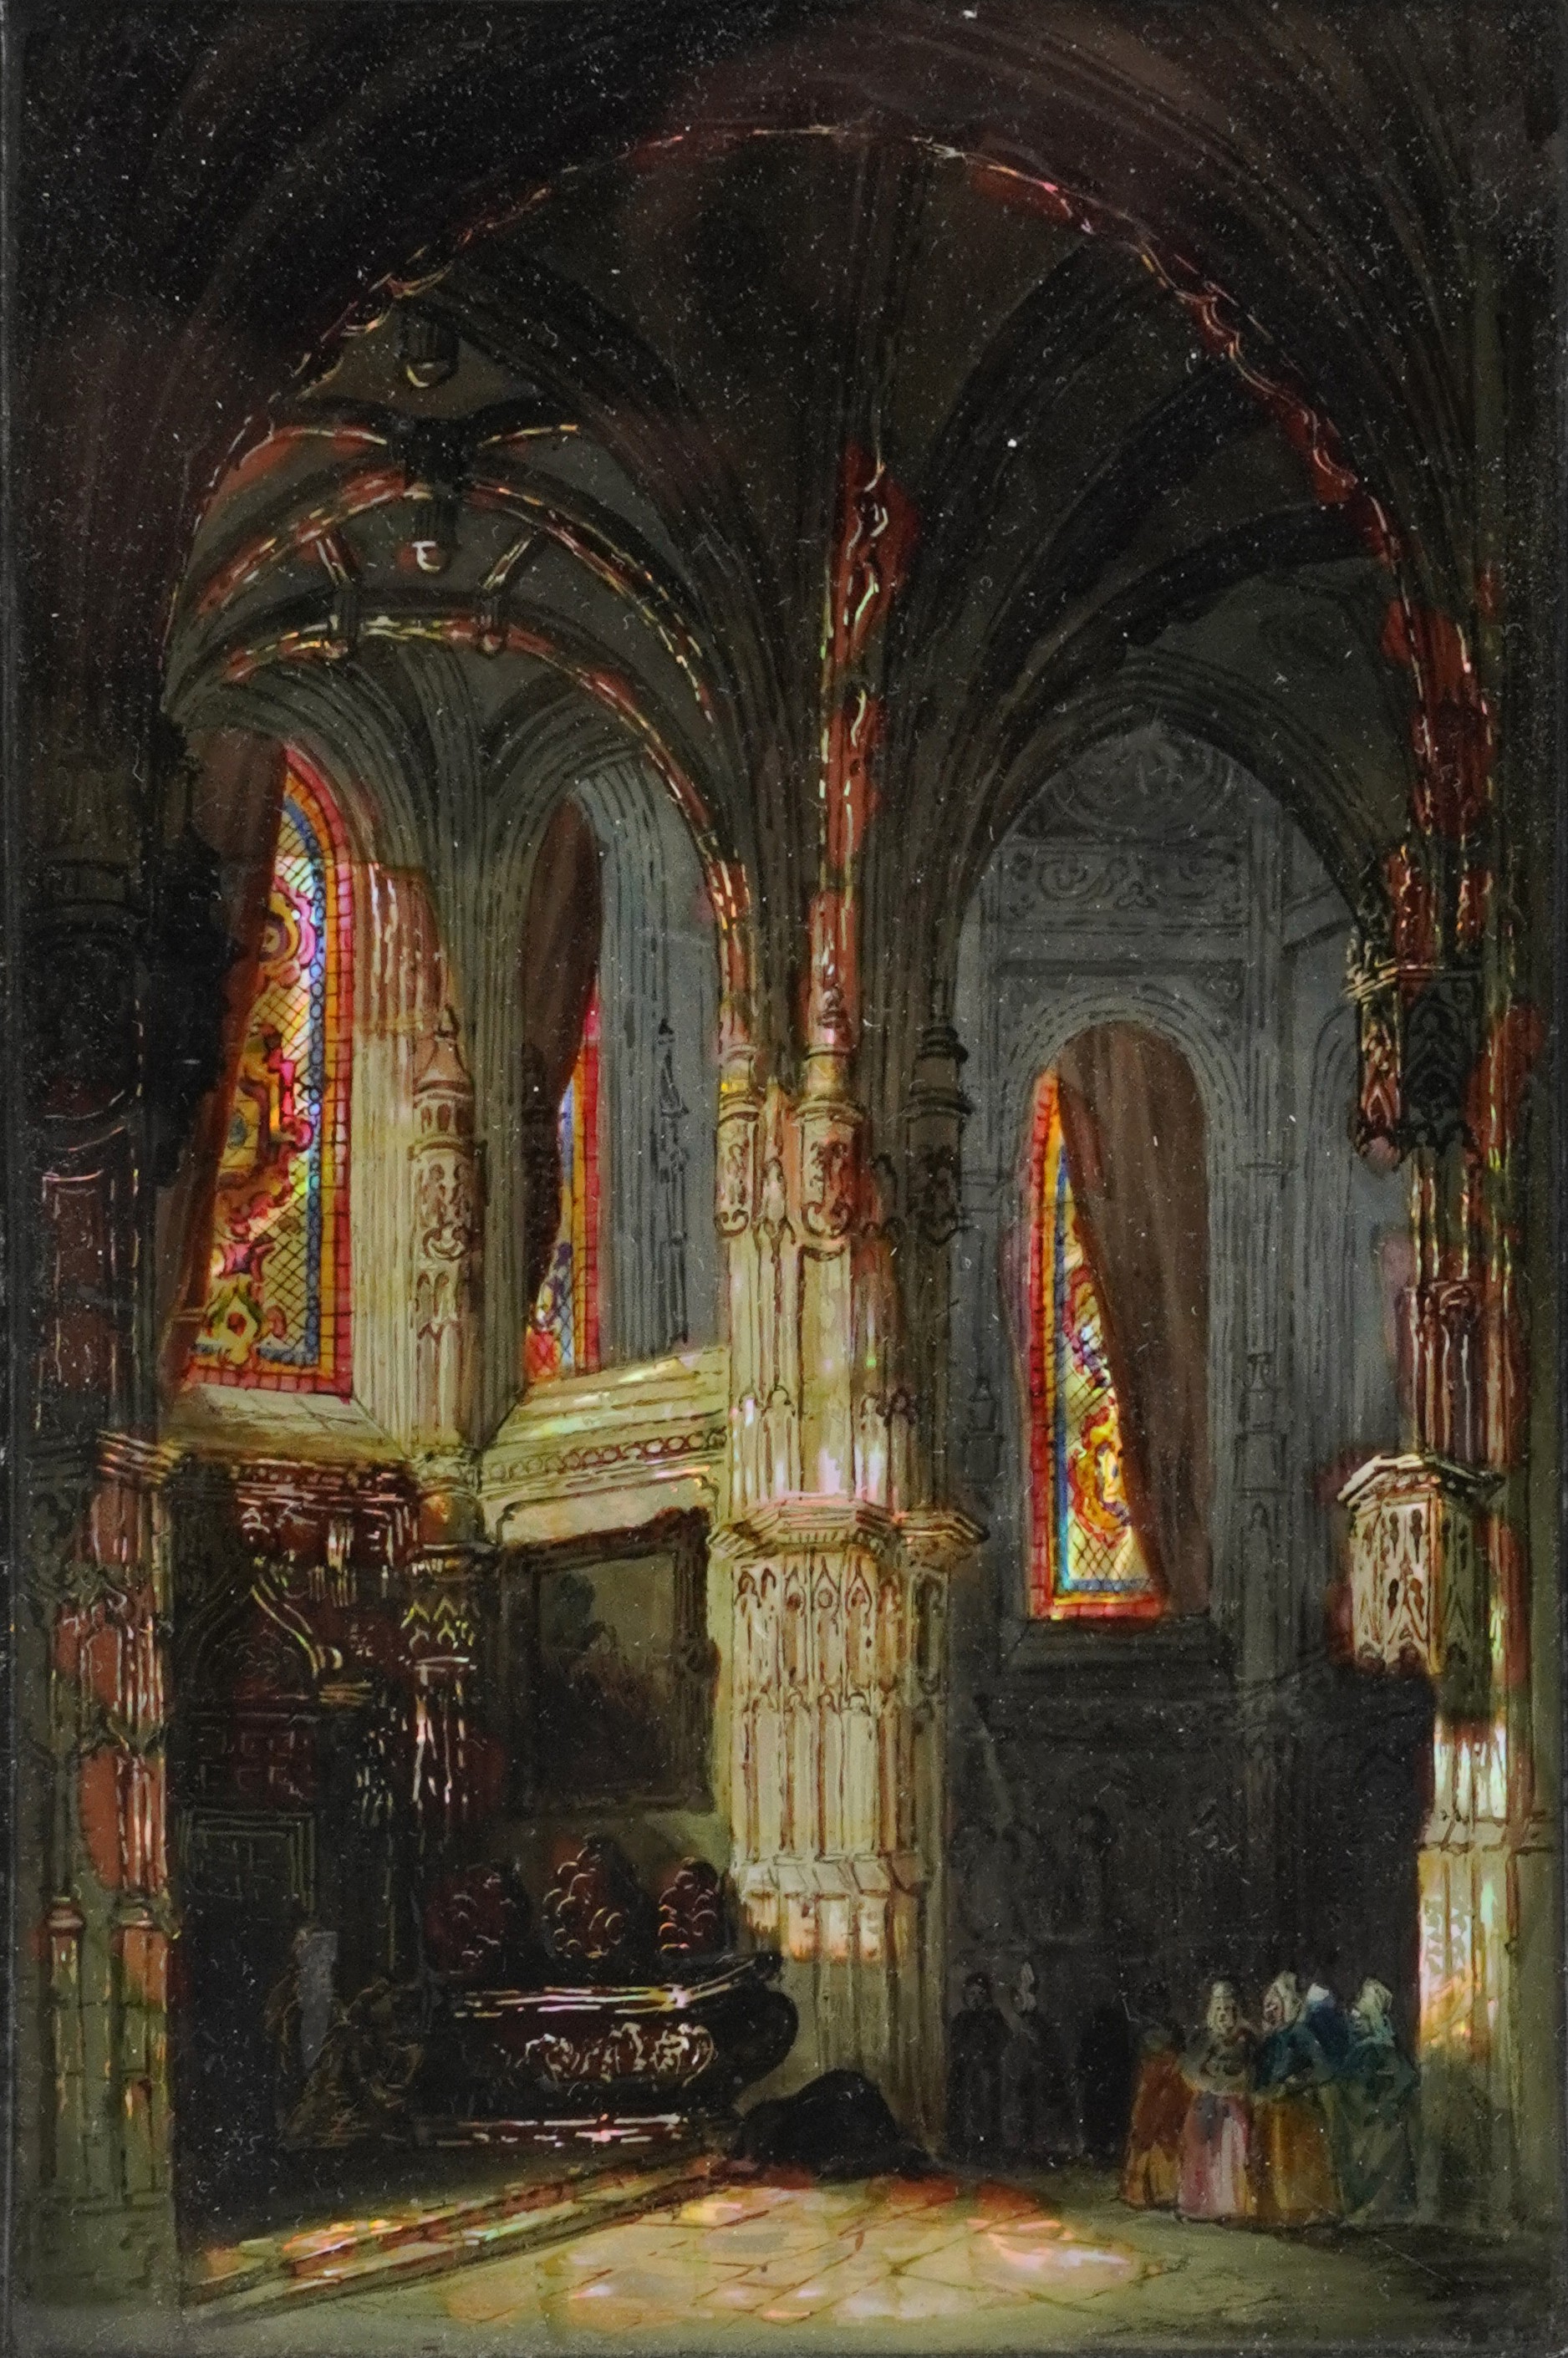 19th century artists folio, the cover a reverse painting onto glass of a church interior possibly - Image 2 of 5